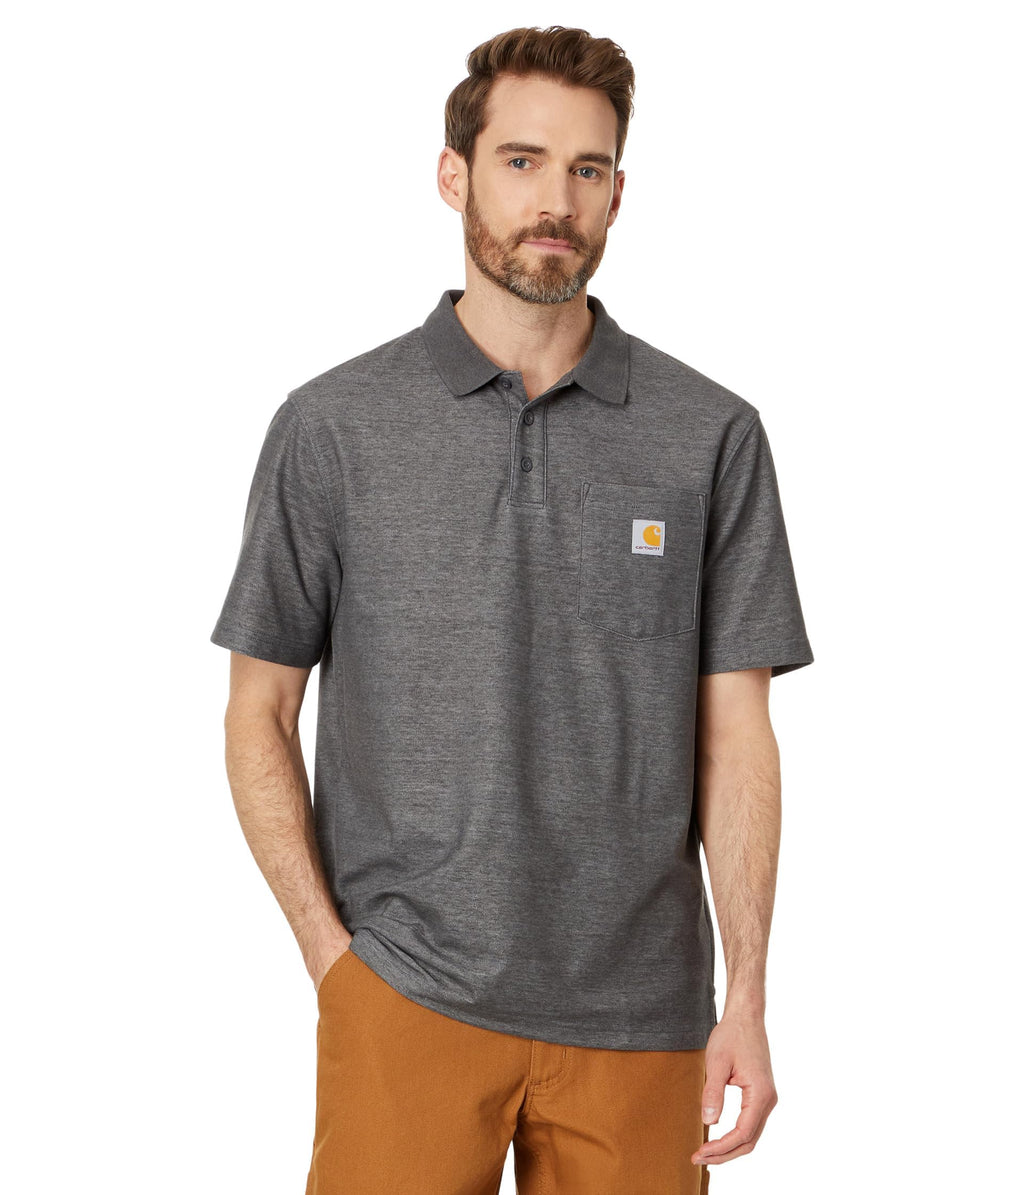 Carhartt 106685 Men's Loose Fit Midweight Short-Sleeve Pocket Polo, Carbon Heather